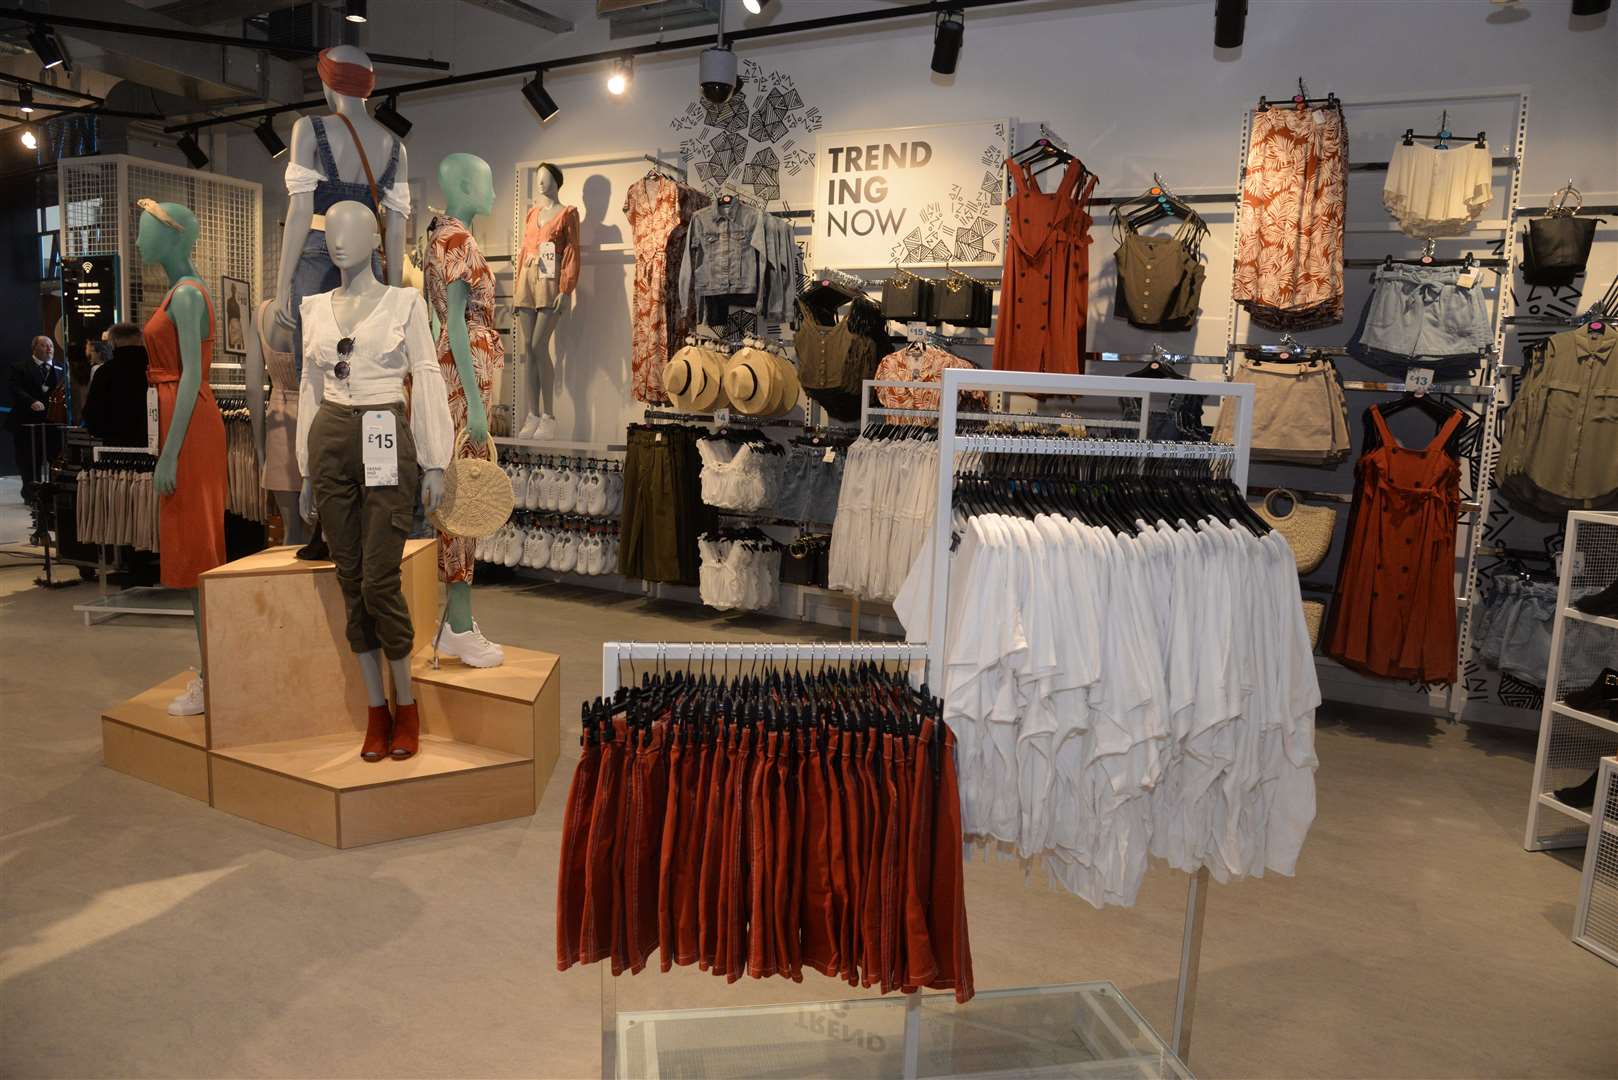 Primark opened a new flagship store in Bluewater in 2019